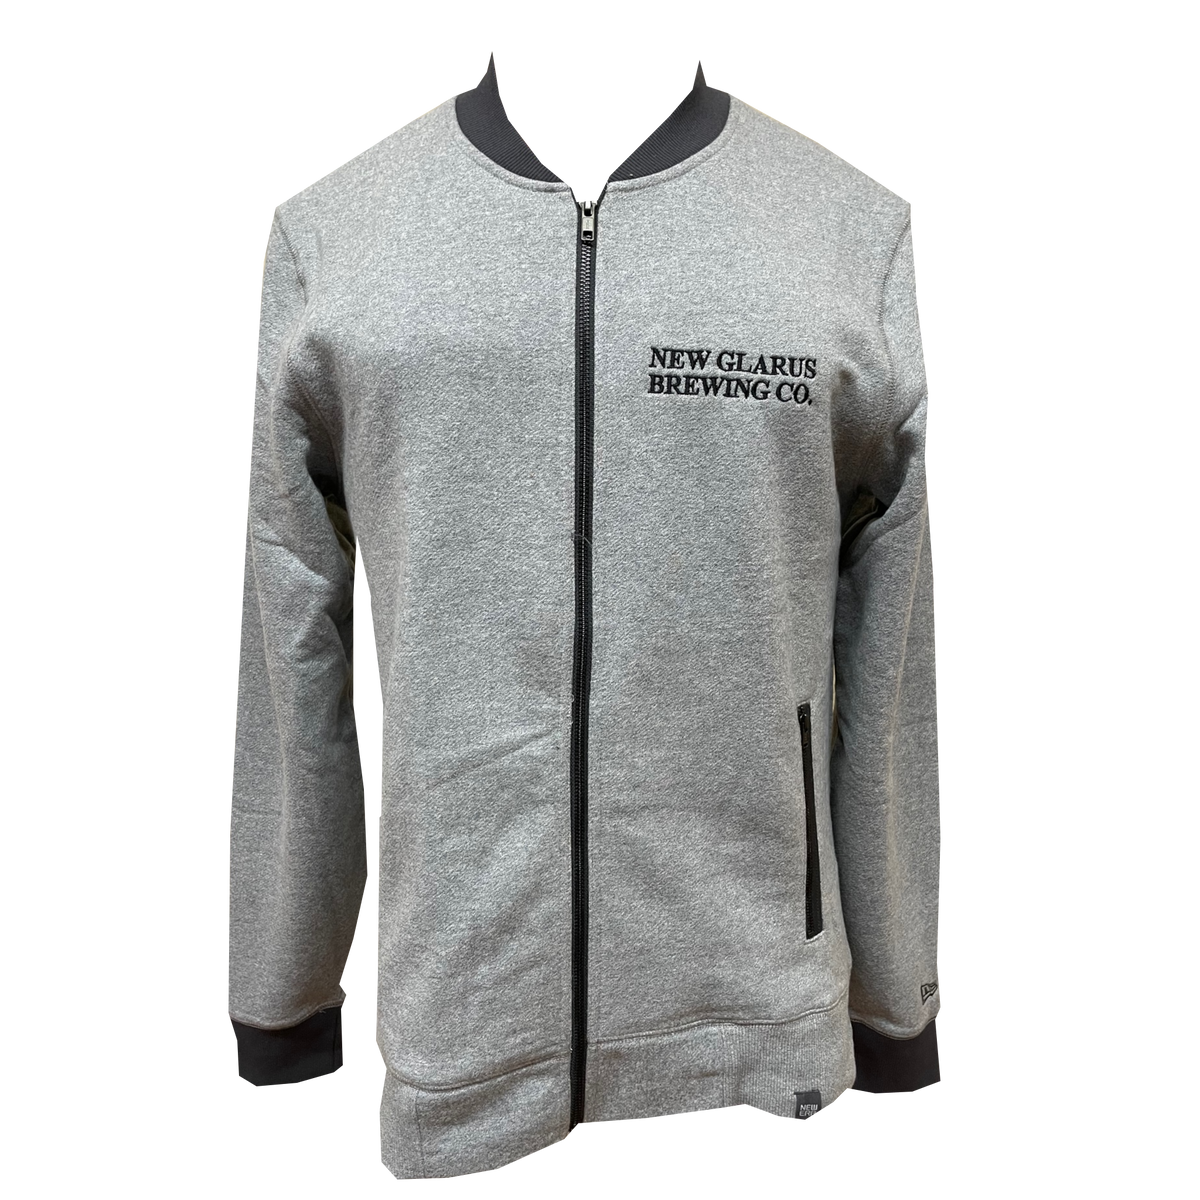 Light gray full zip jacket with darker gray knit cuffs, collar and waist band. Features New Glarus Brewing Co. embroidered in black on the front left chest.